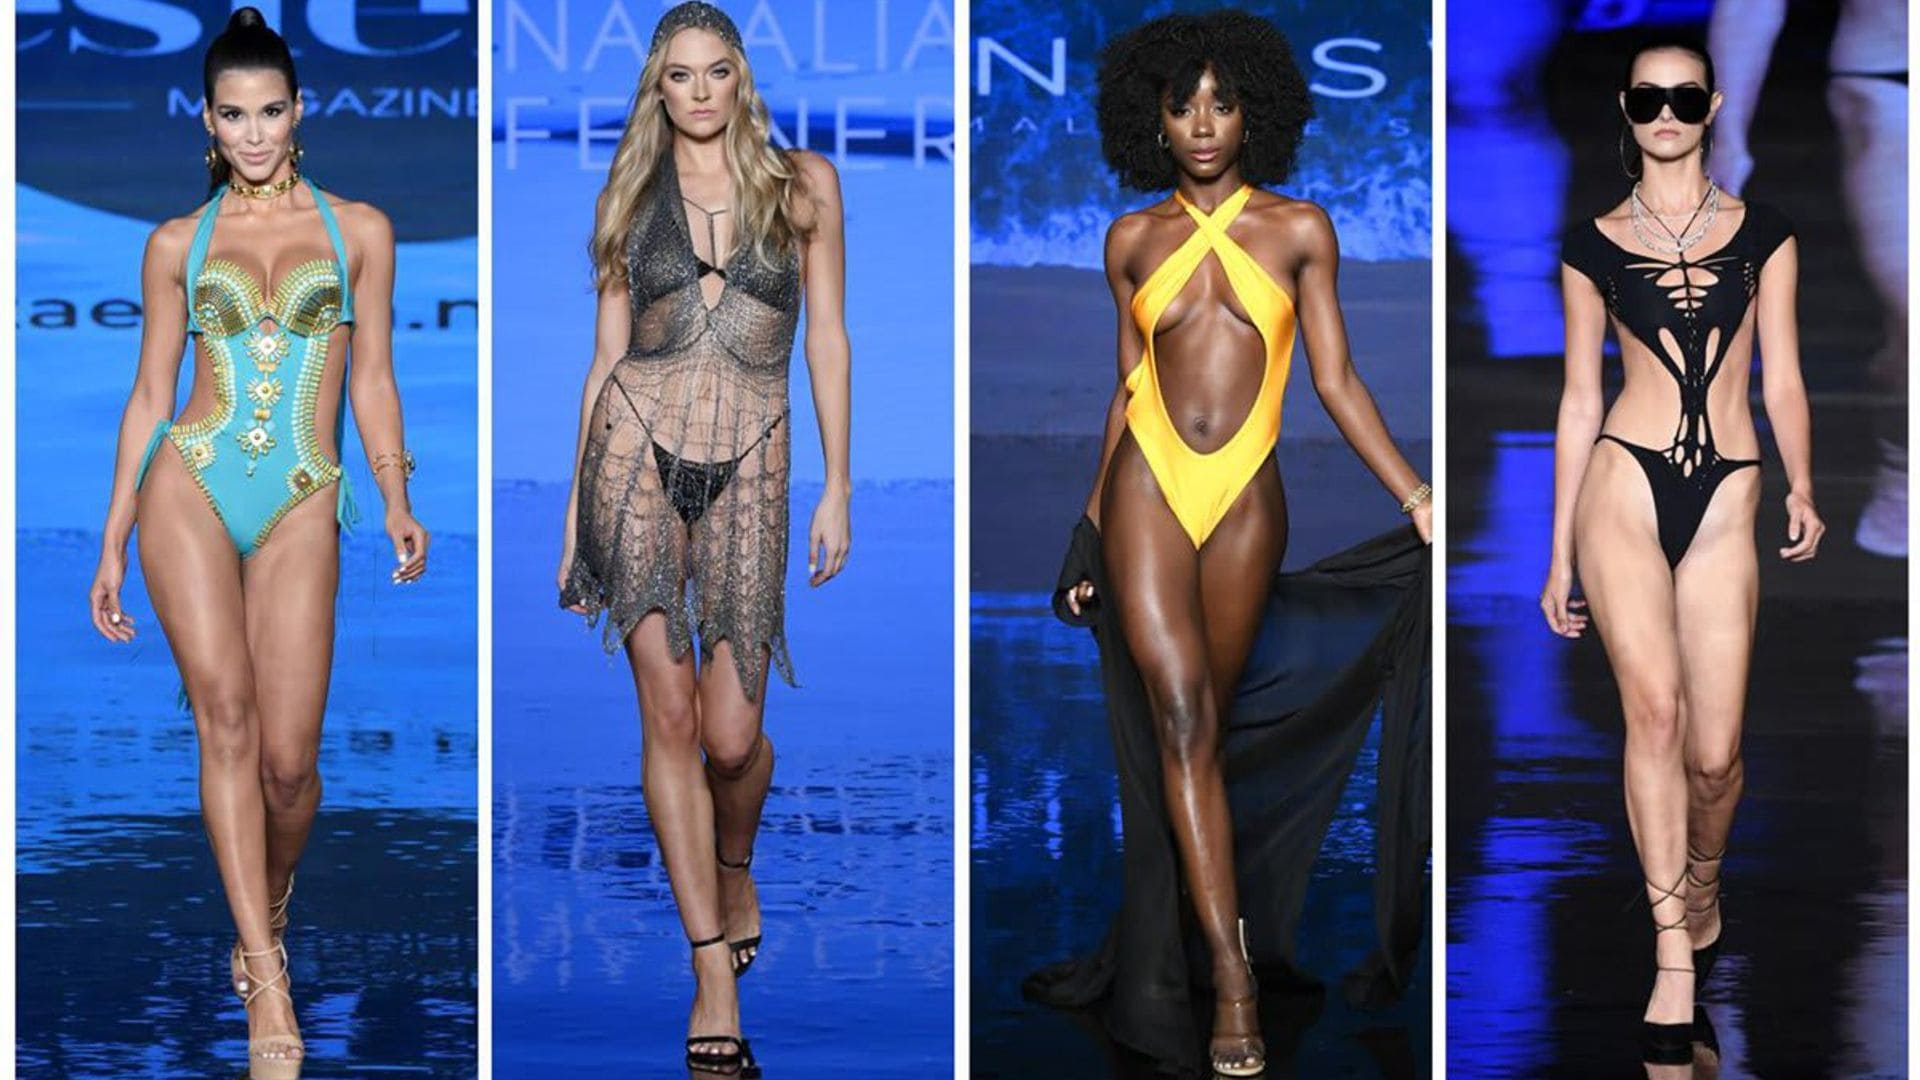 The most glamorous swimsuits from Miami Swim Week 2021 [PHOTOS]